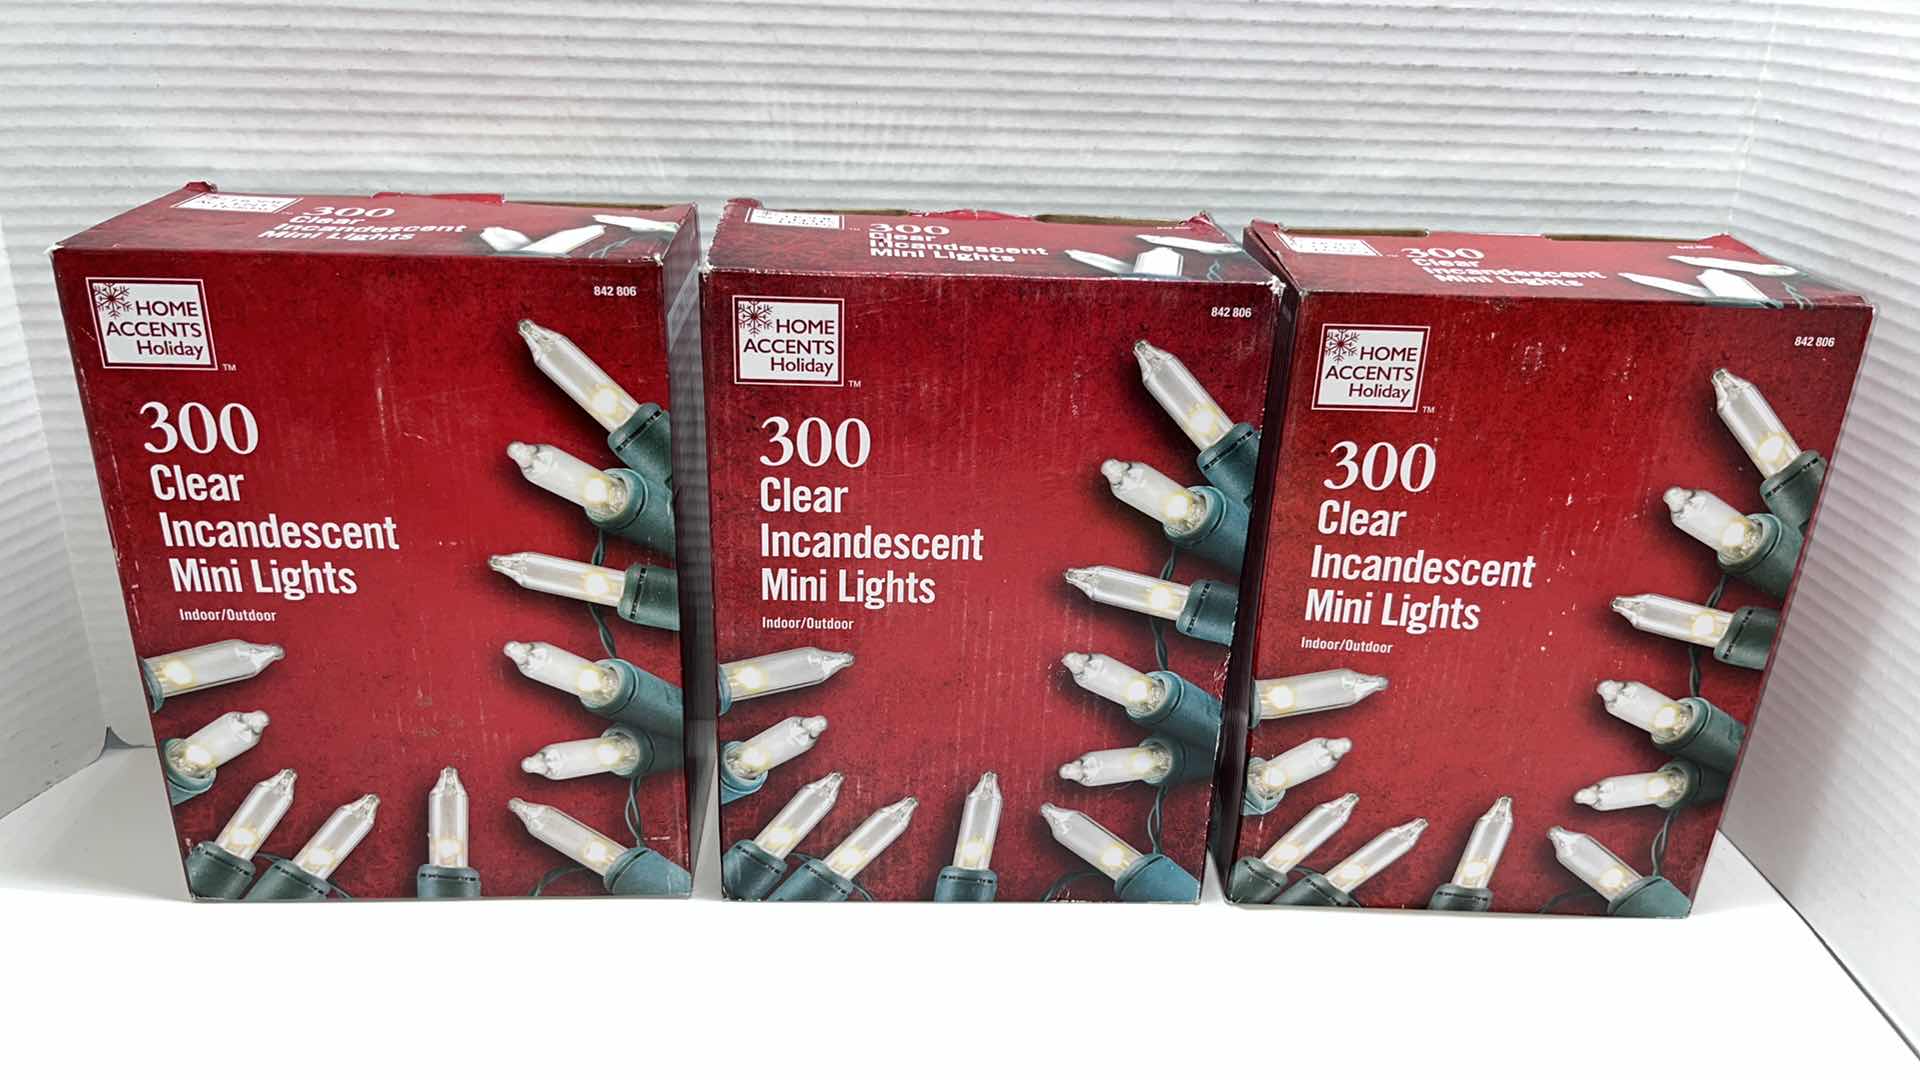 Photo 1 of NEW HOME ACCENTS HOLIDAY 300 CLEAR INCANDESCENT MINI LIGHTS #842806 (3)